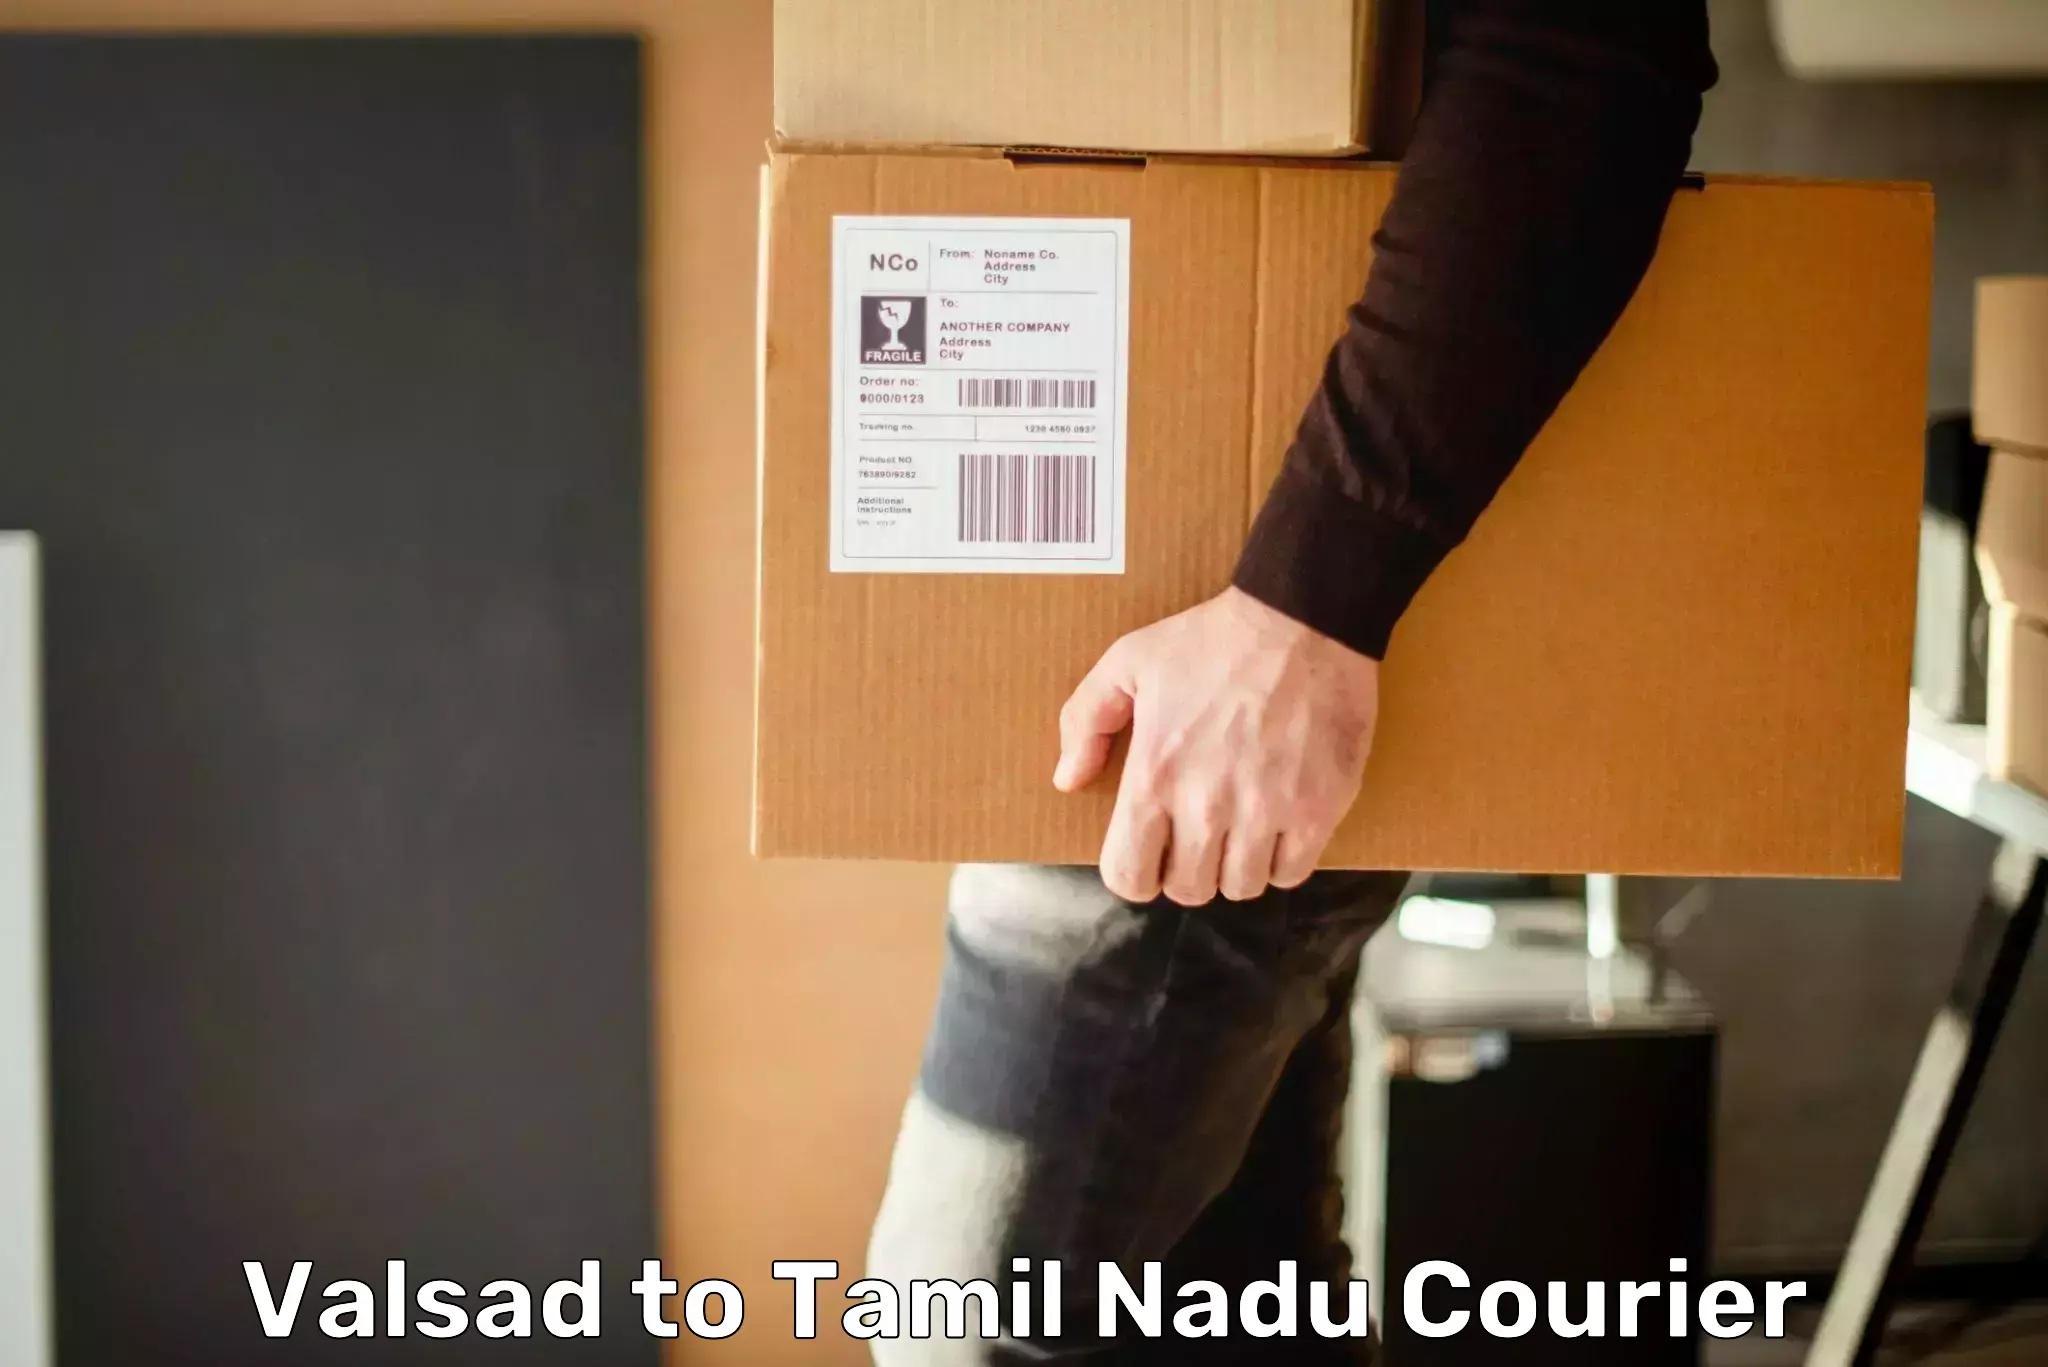 State-of-the-art courier technology Valsad to Tamil Nadu